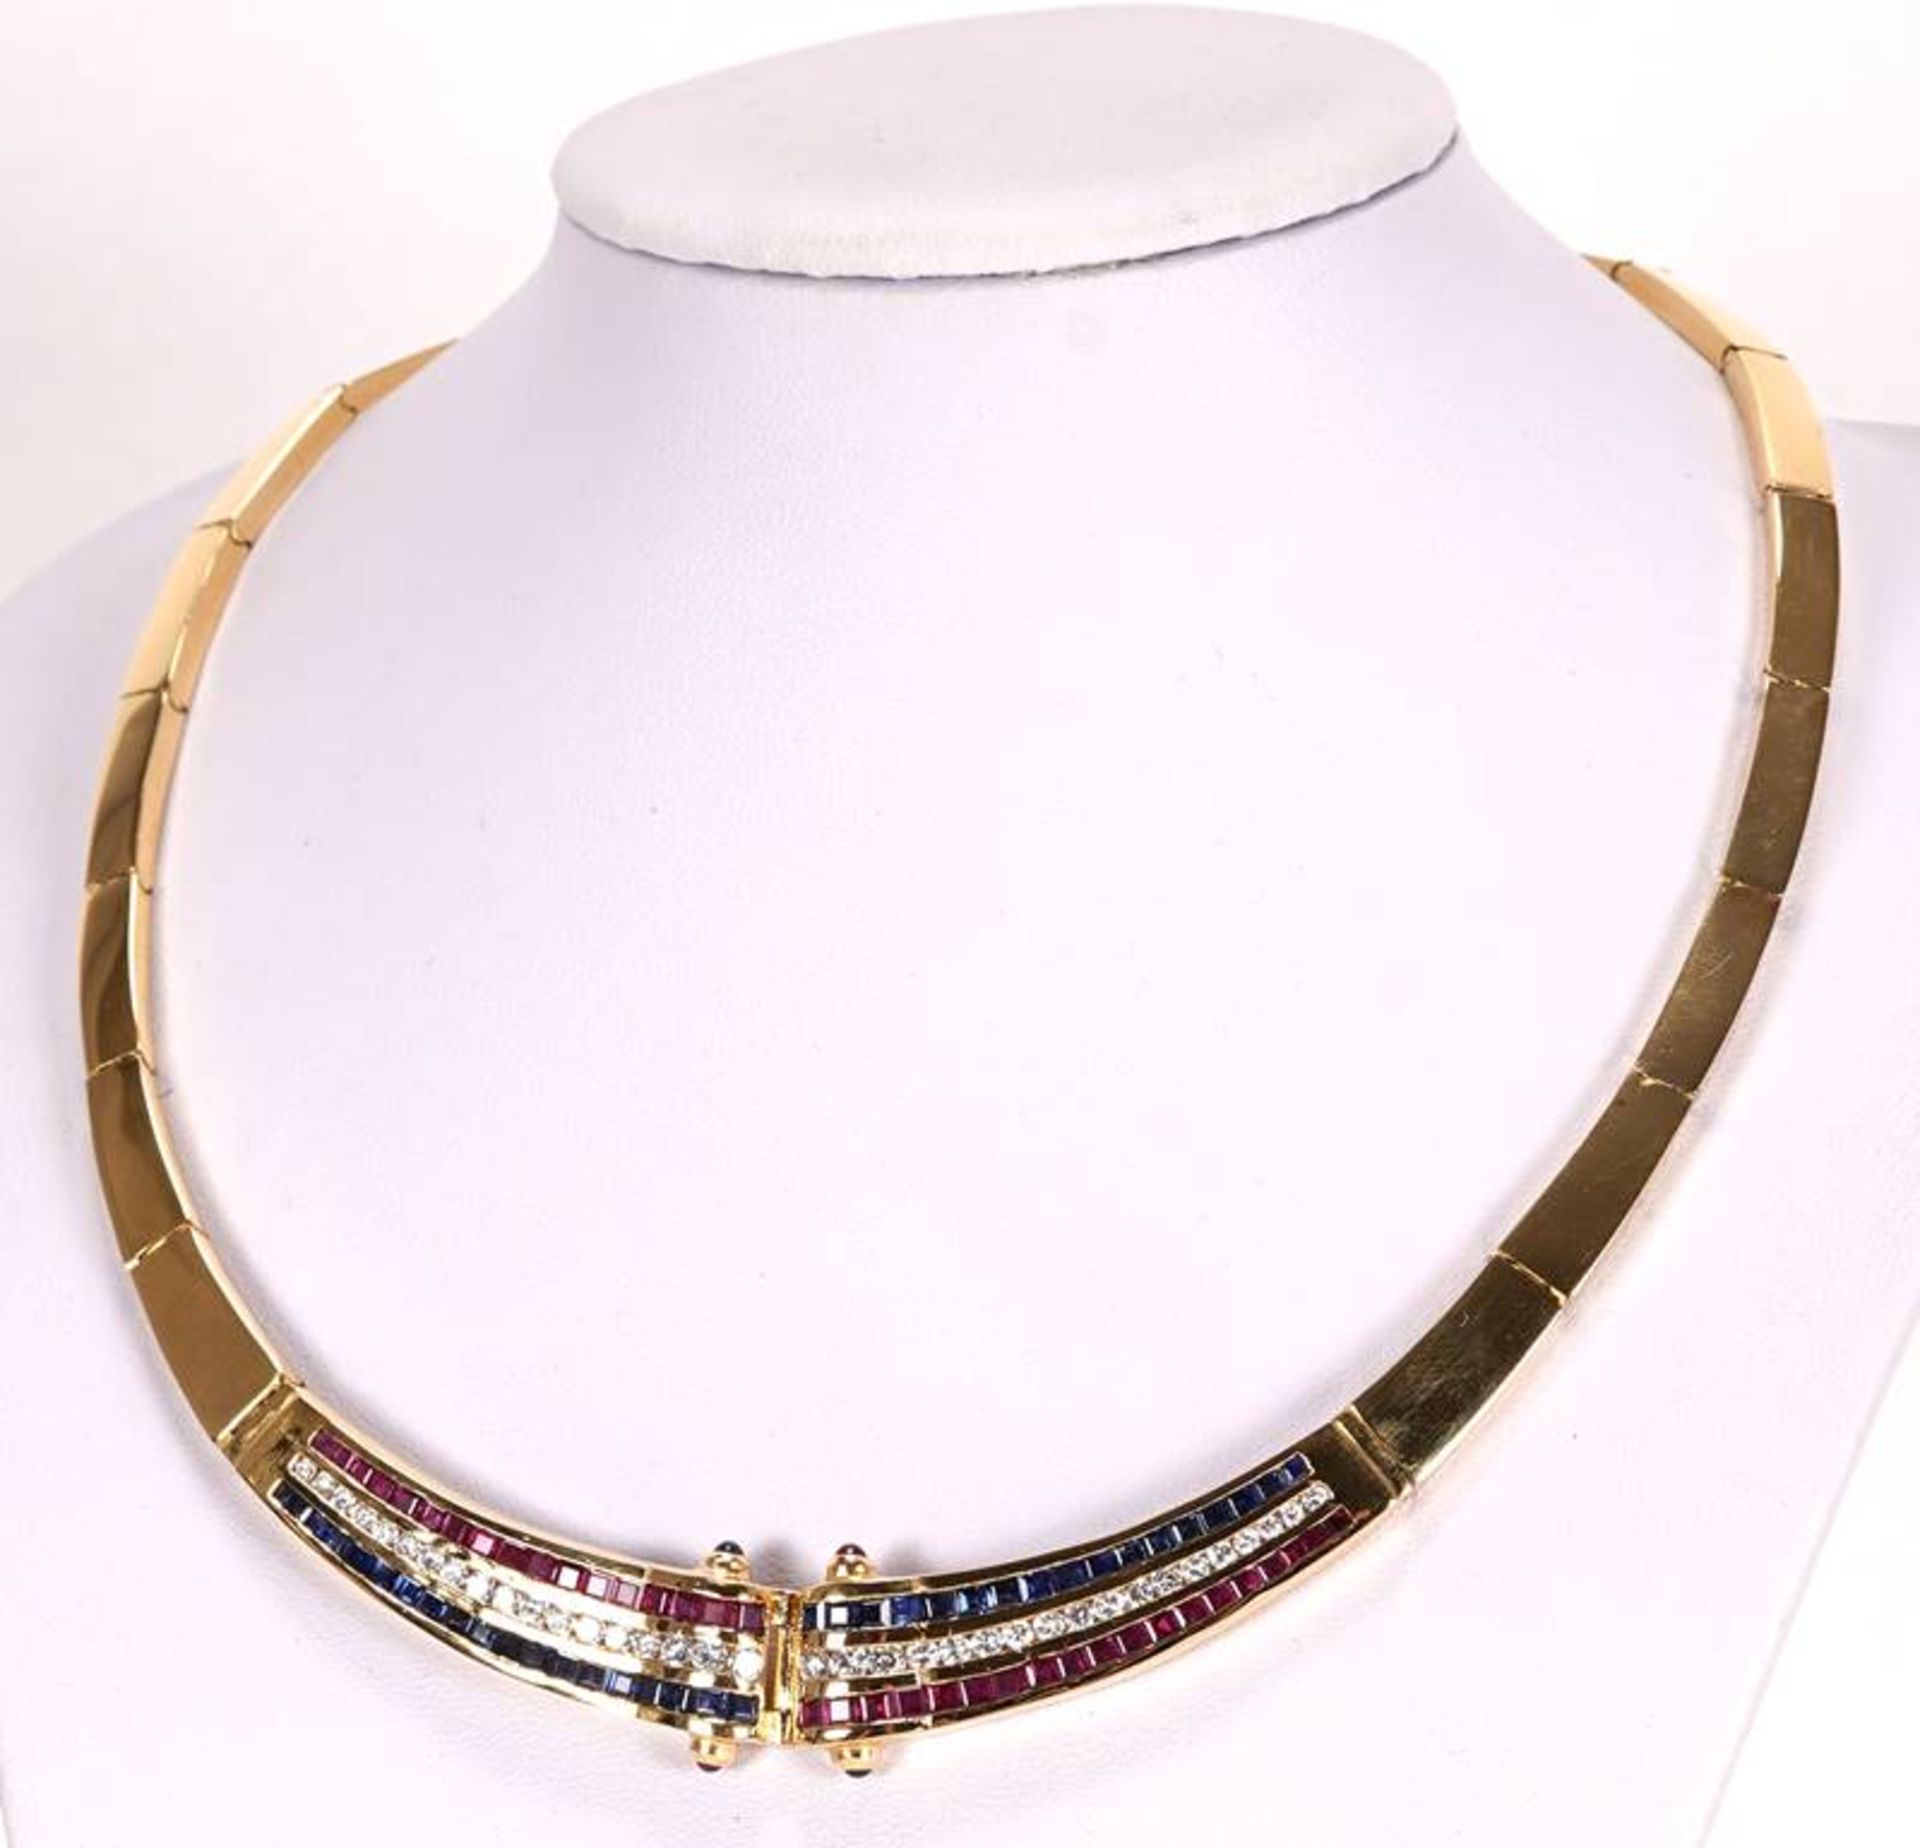 Extravagant necklace - Image 2 of 3